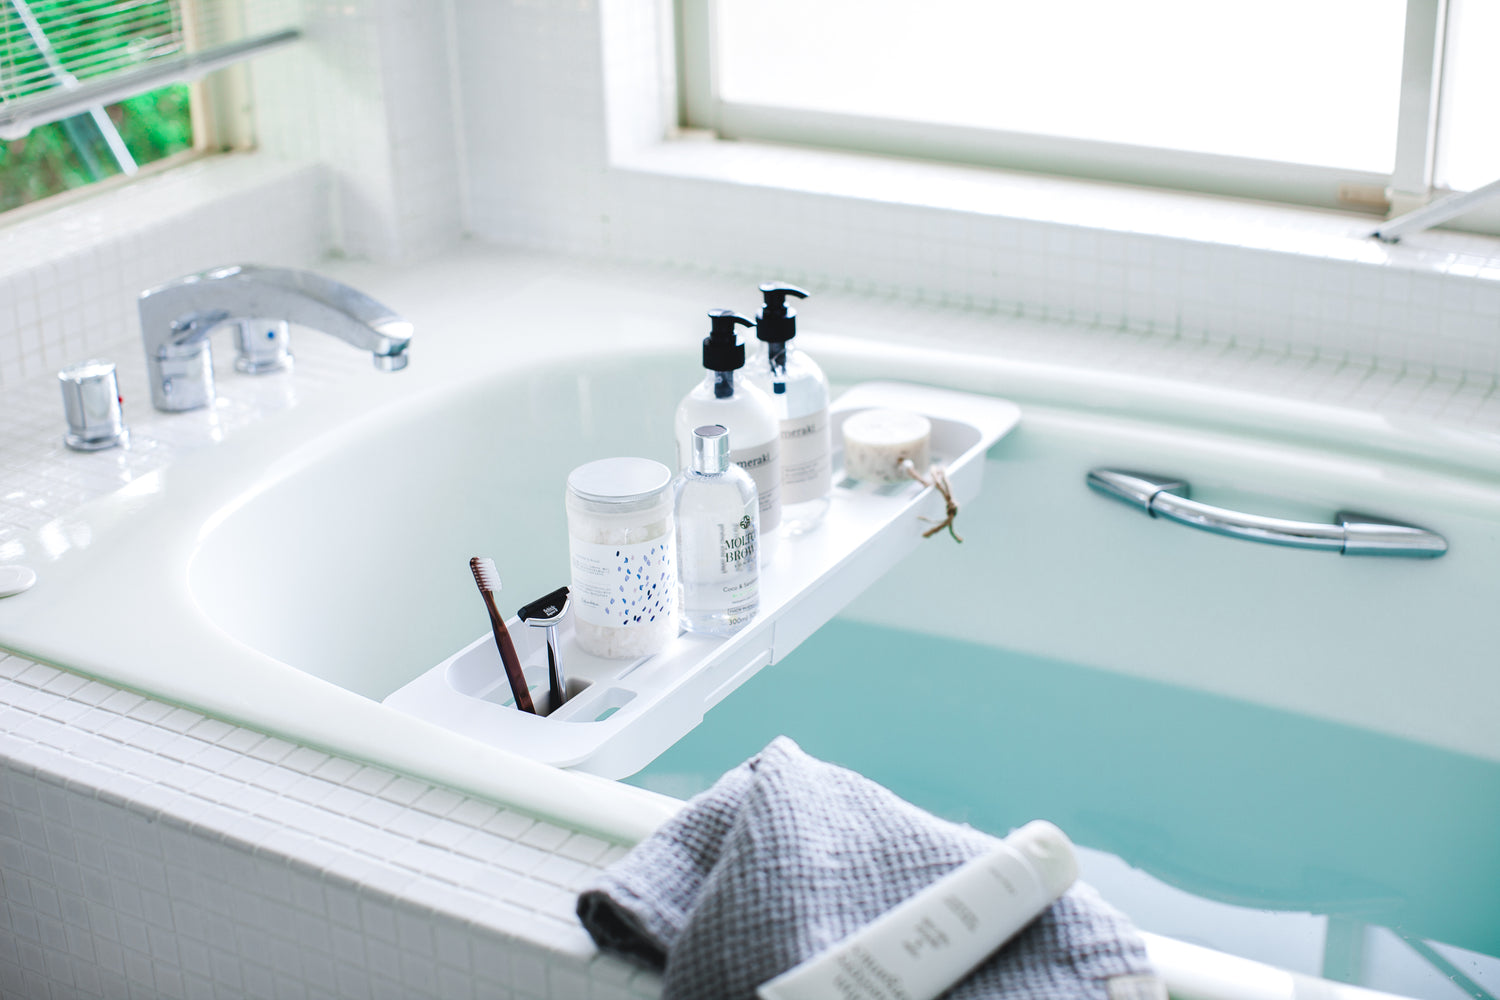 View 3 - White Expandable Bathtub Caddy holding beauty cleaning products in bathtub by Yamazaki Home.